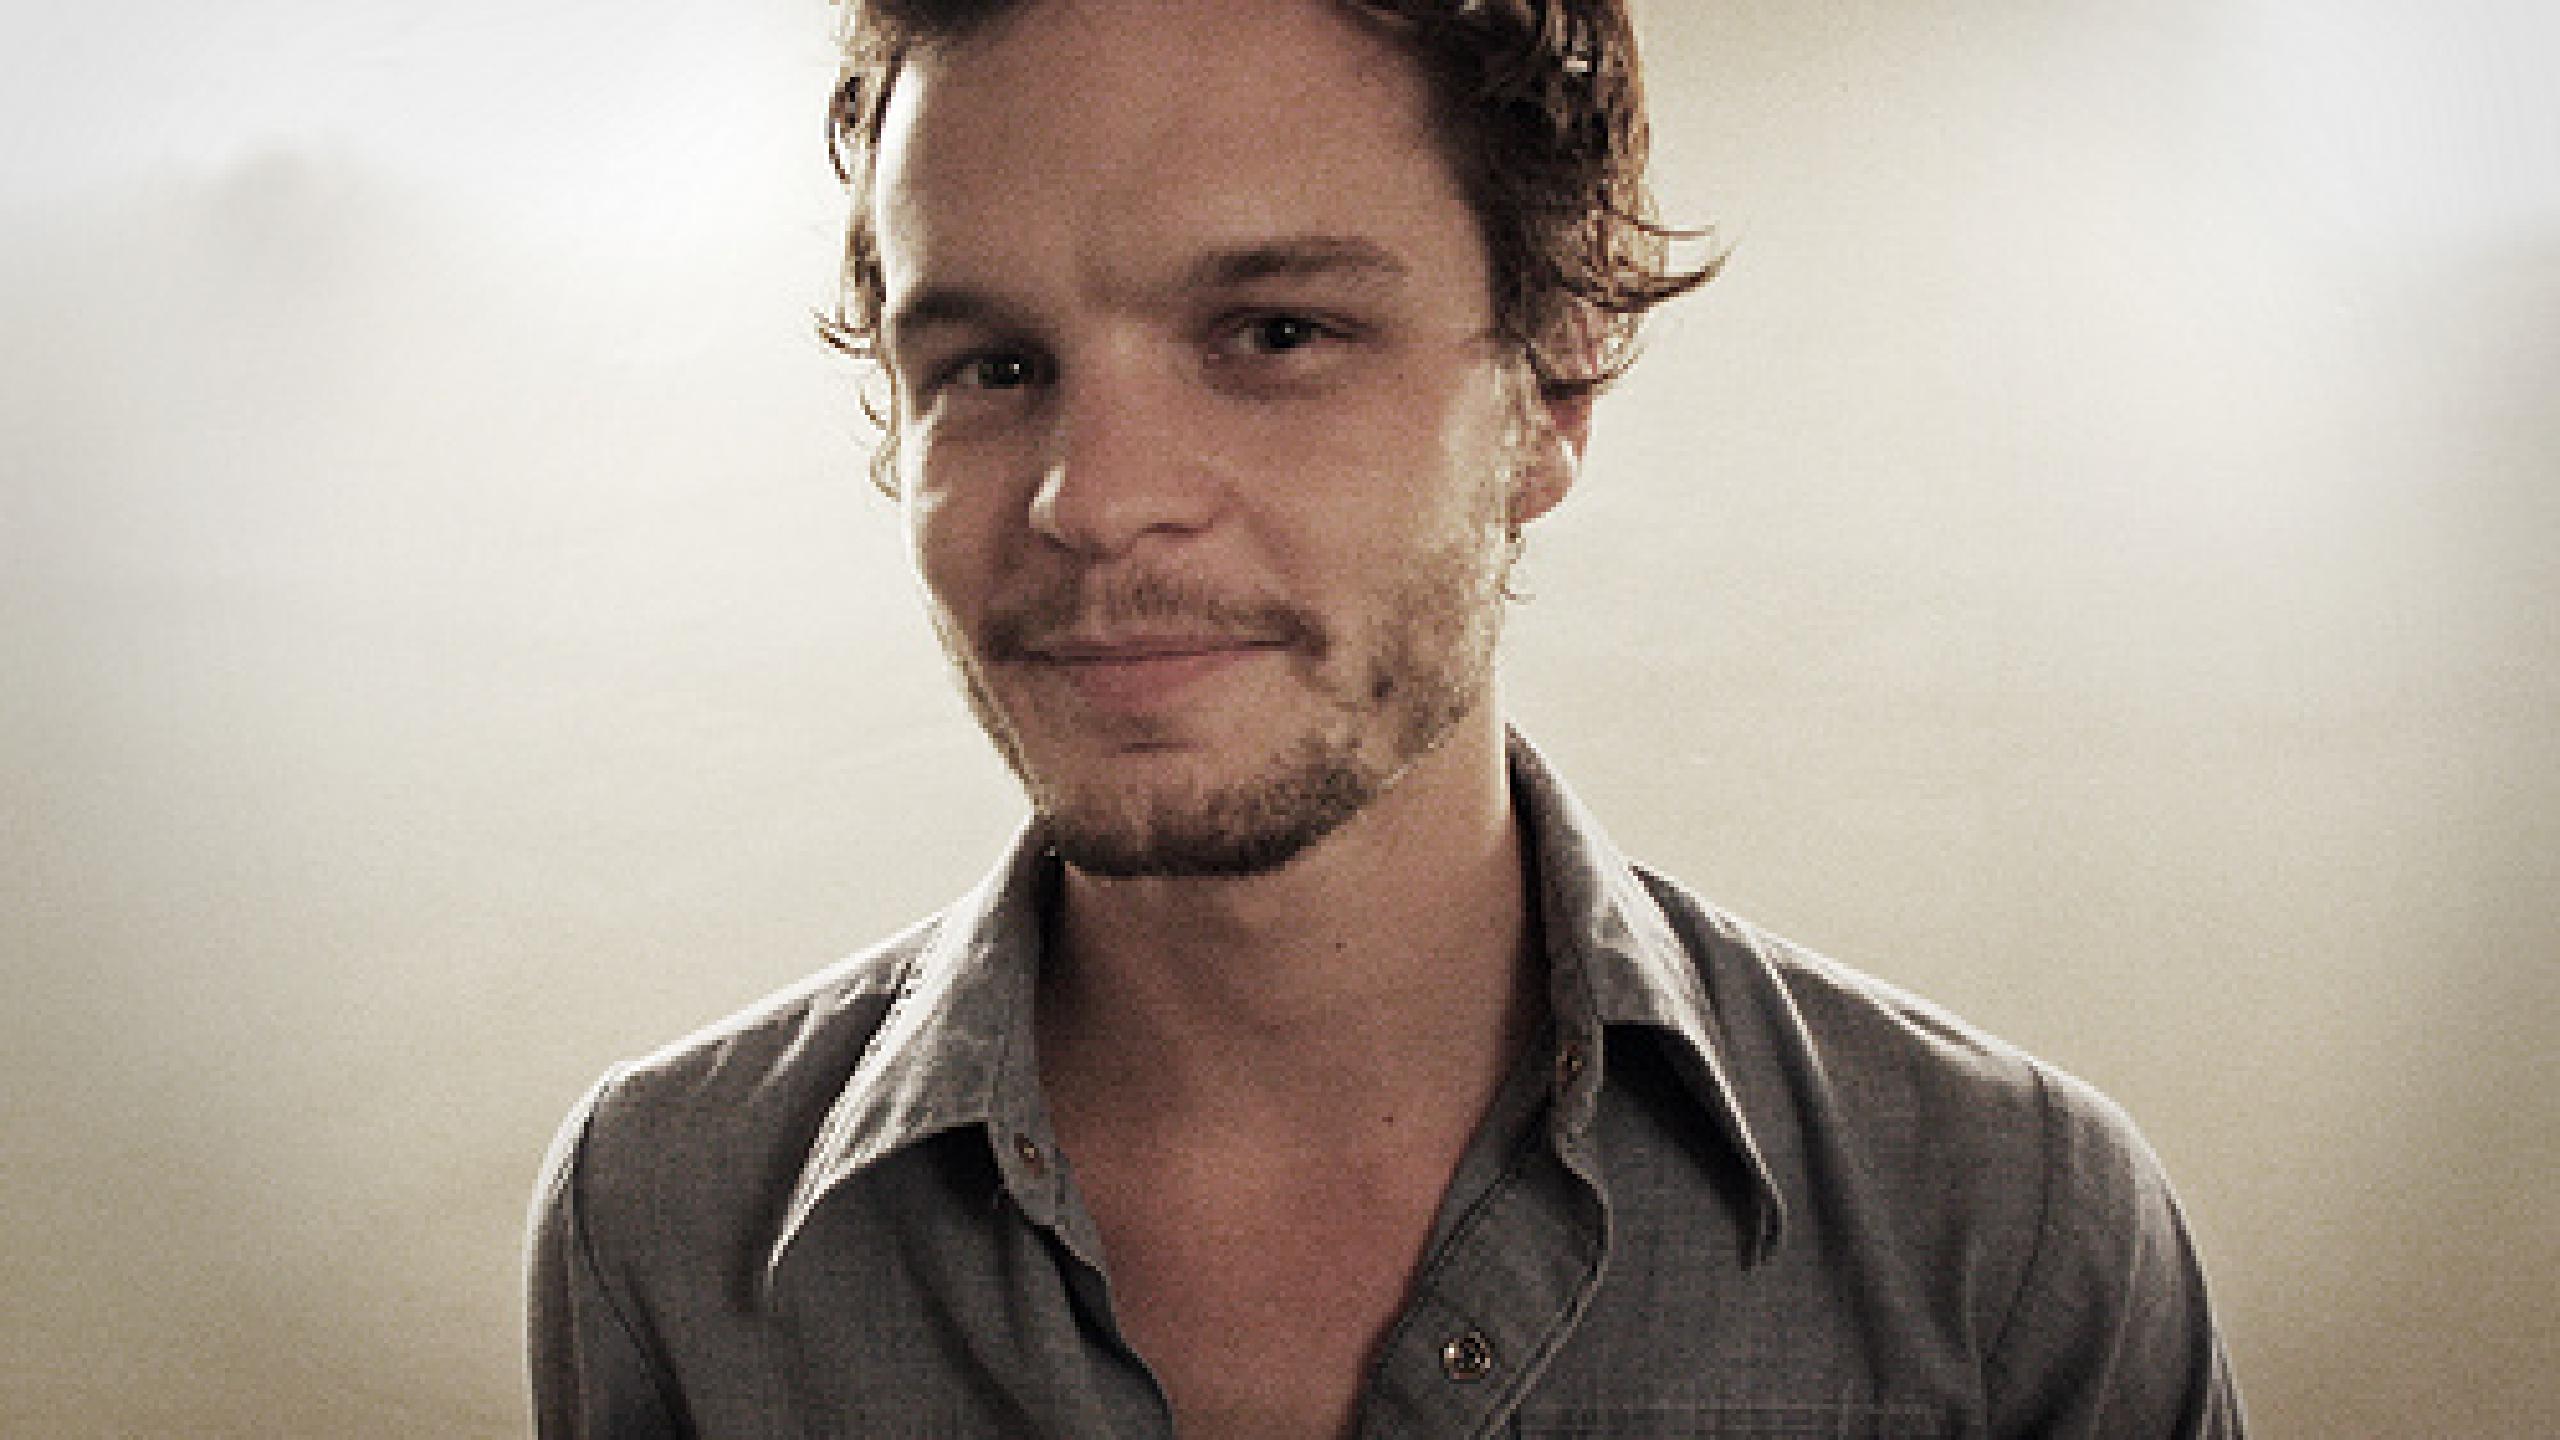 the tallest man on earth tour